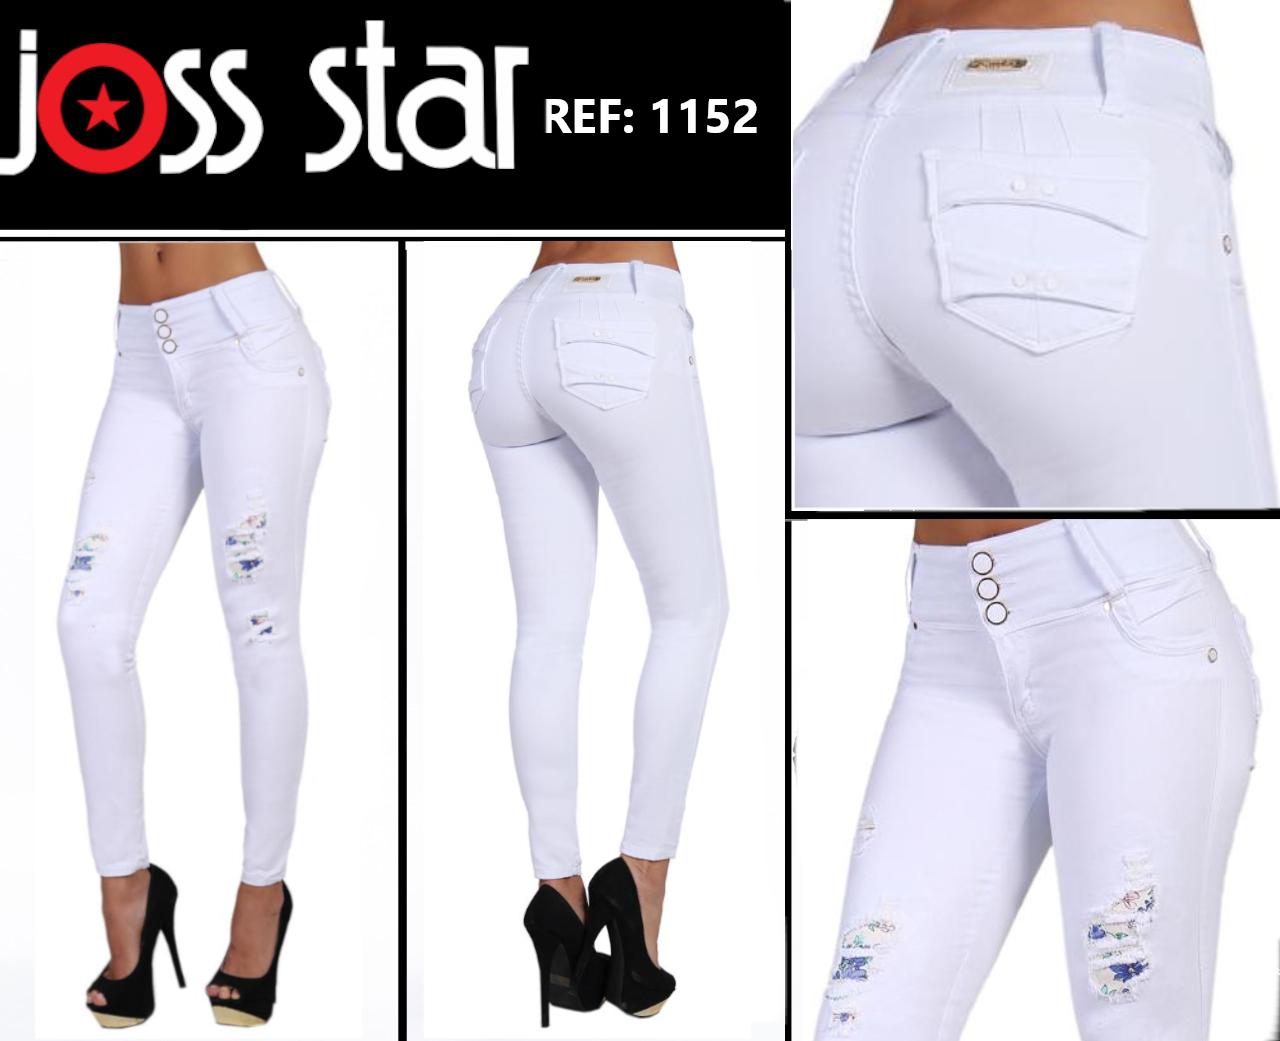 Lady´s Jeans Trousers, Exclusive Colombian Design Joss Star Brand Color White